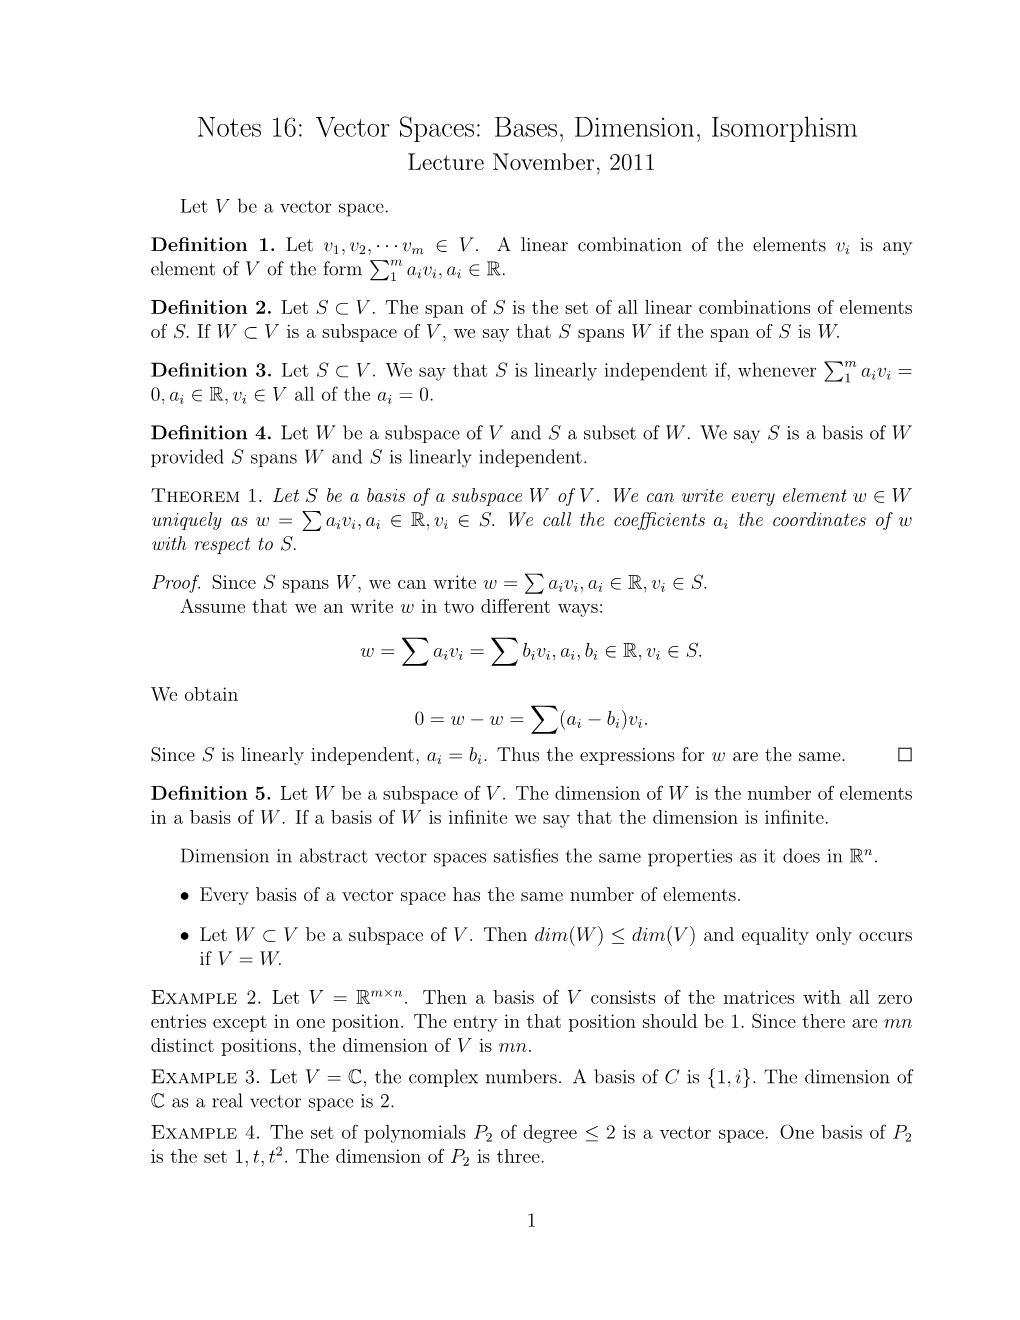 Notes 16: Vector Spaces: Bases, Dimension, Isomorphism Lecture November, 2011